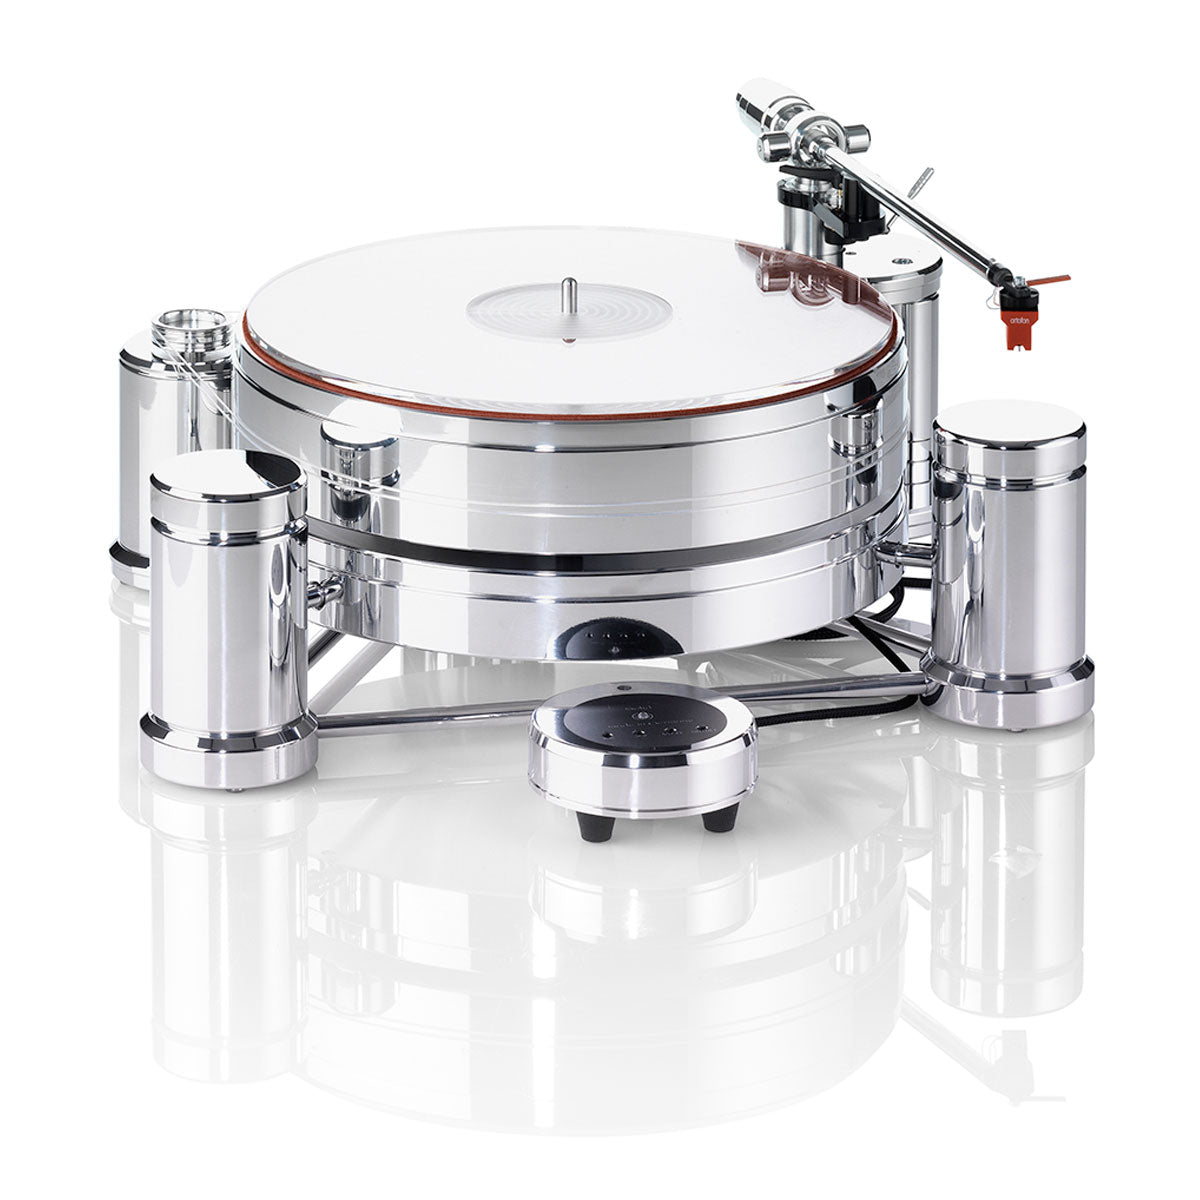 Acoustic Solid Solid Edition Precision Turntable